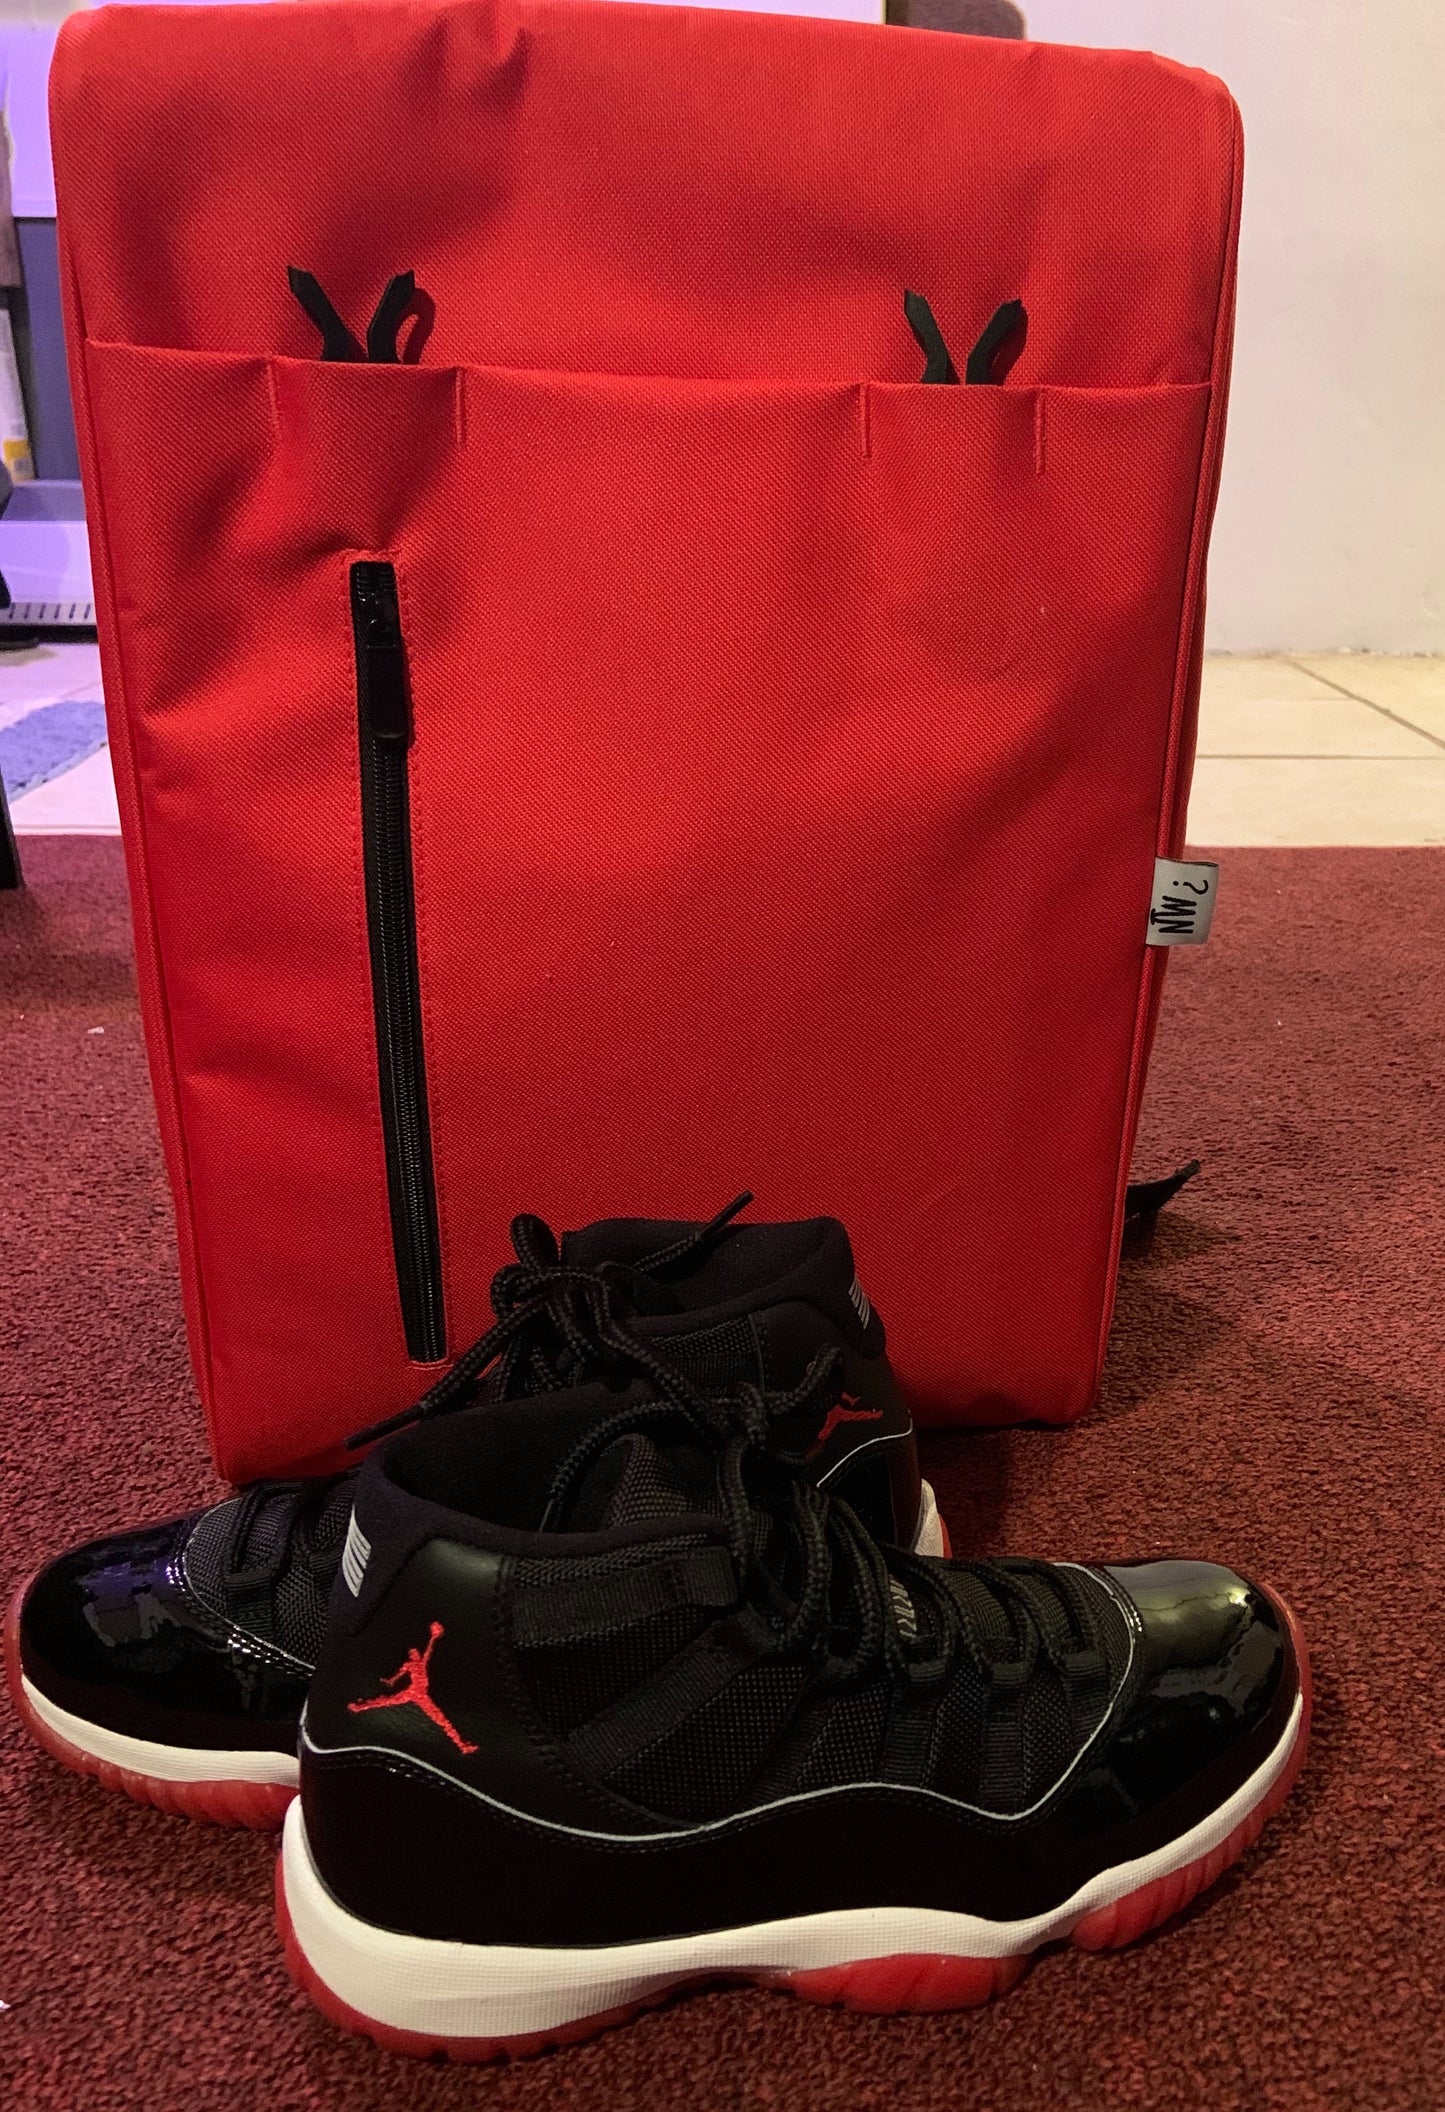 Red Sneaker Backpack (Limited Edition)